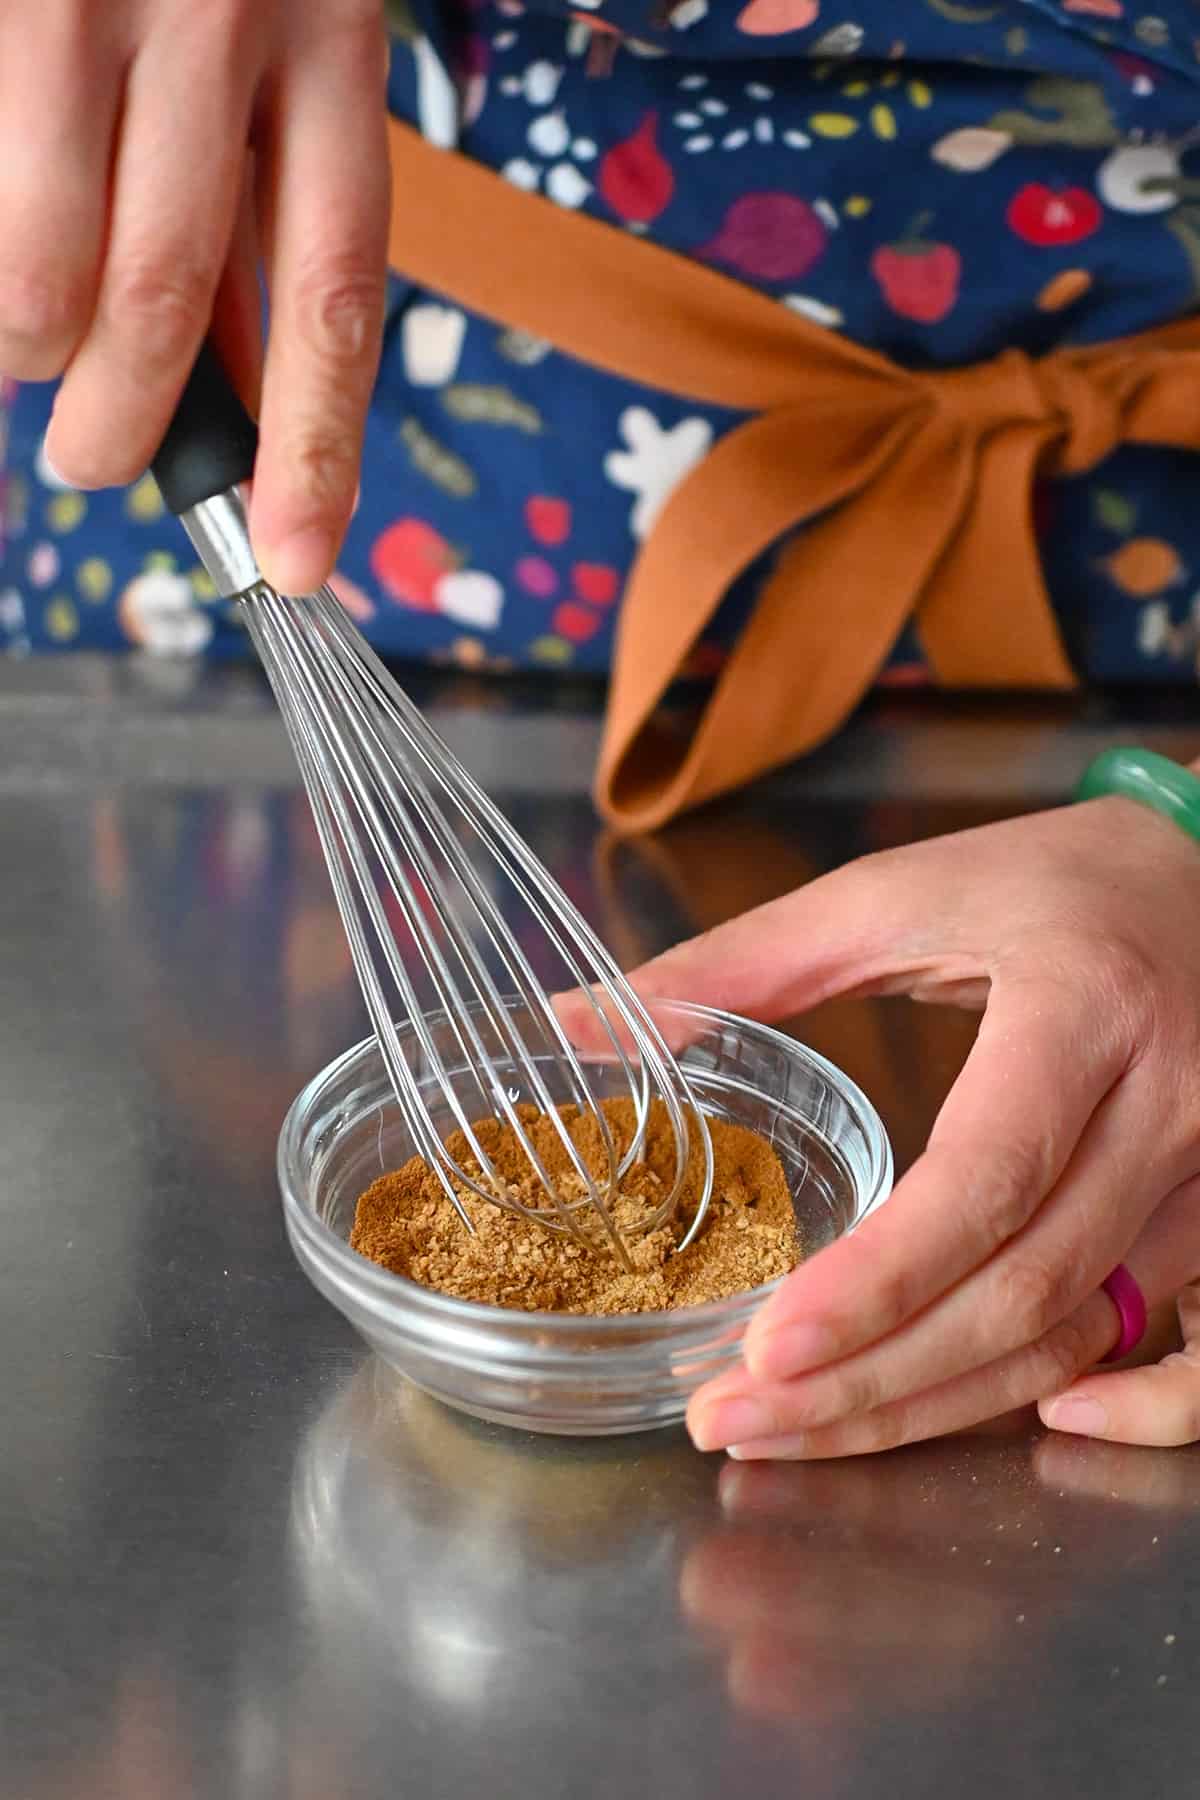 Using a whisk to blend the cinnamon sugar snickerdoodles coating in a small bowl.